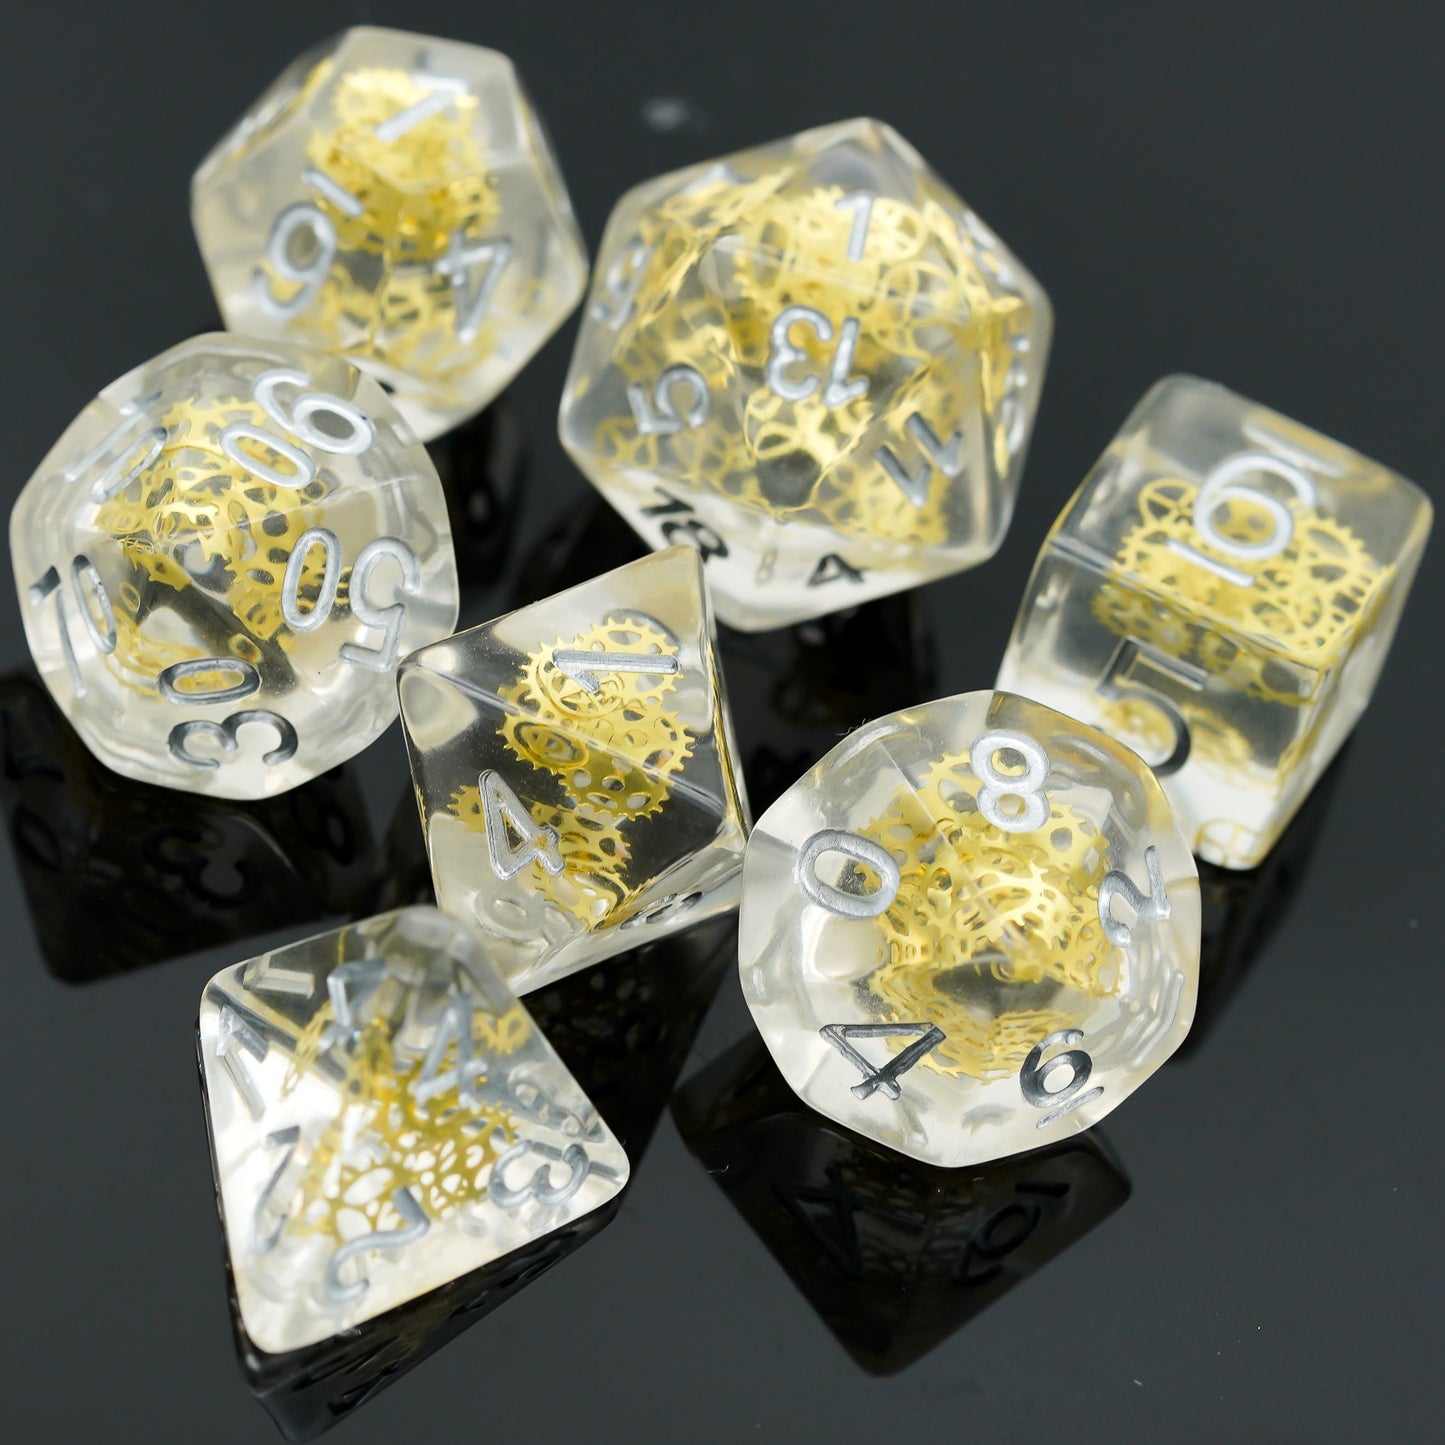 Clear resin with white numbers, gears inside, 7 piece dice set